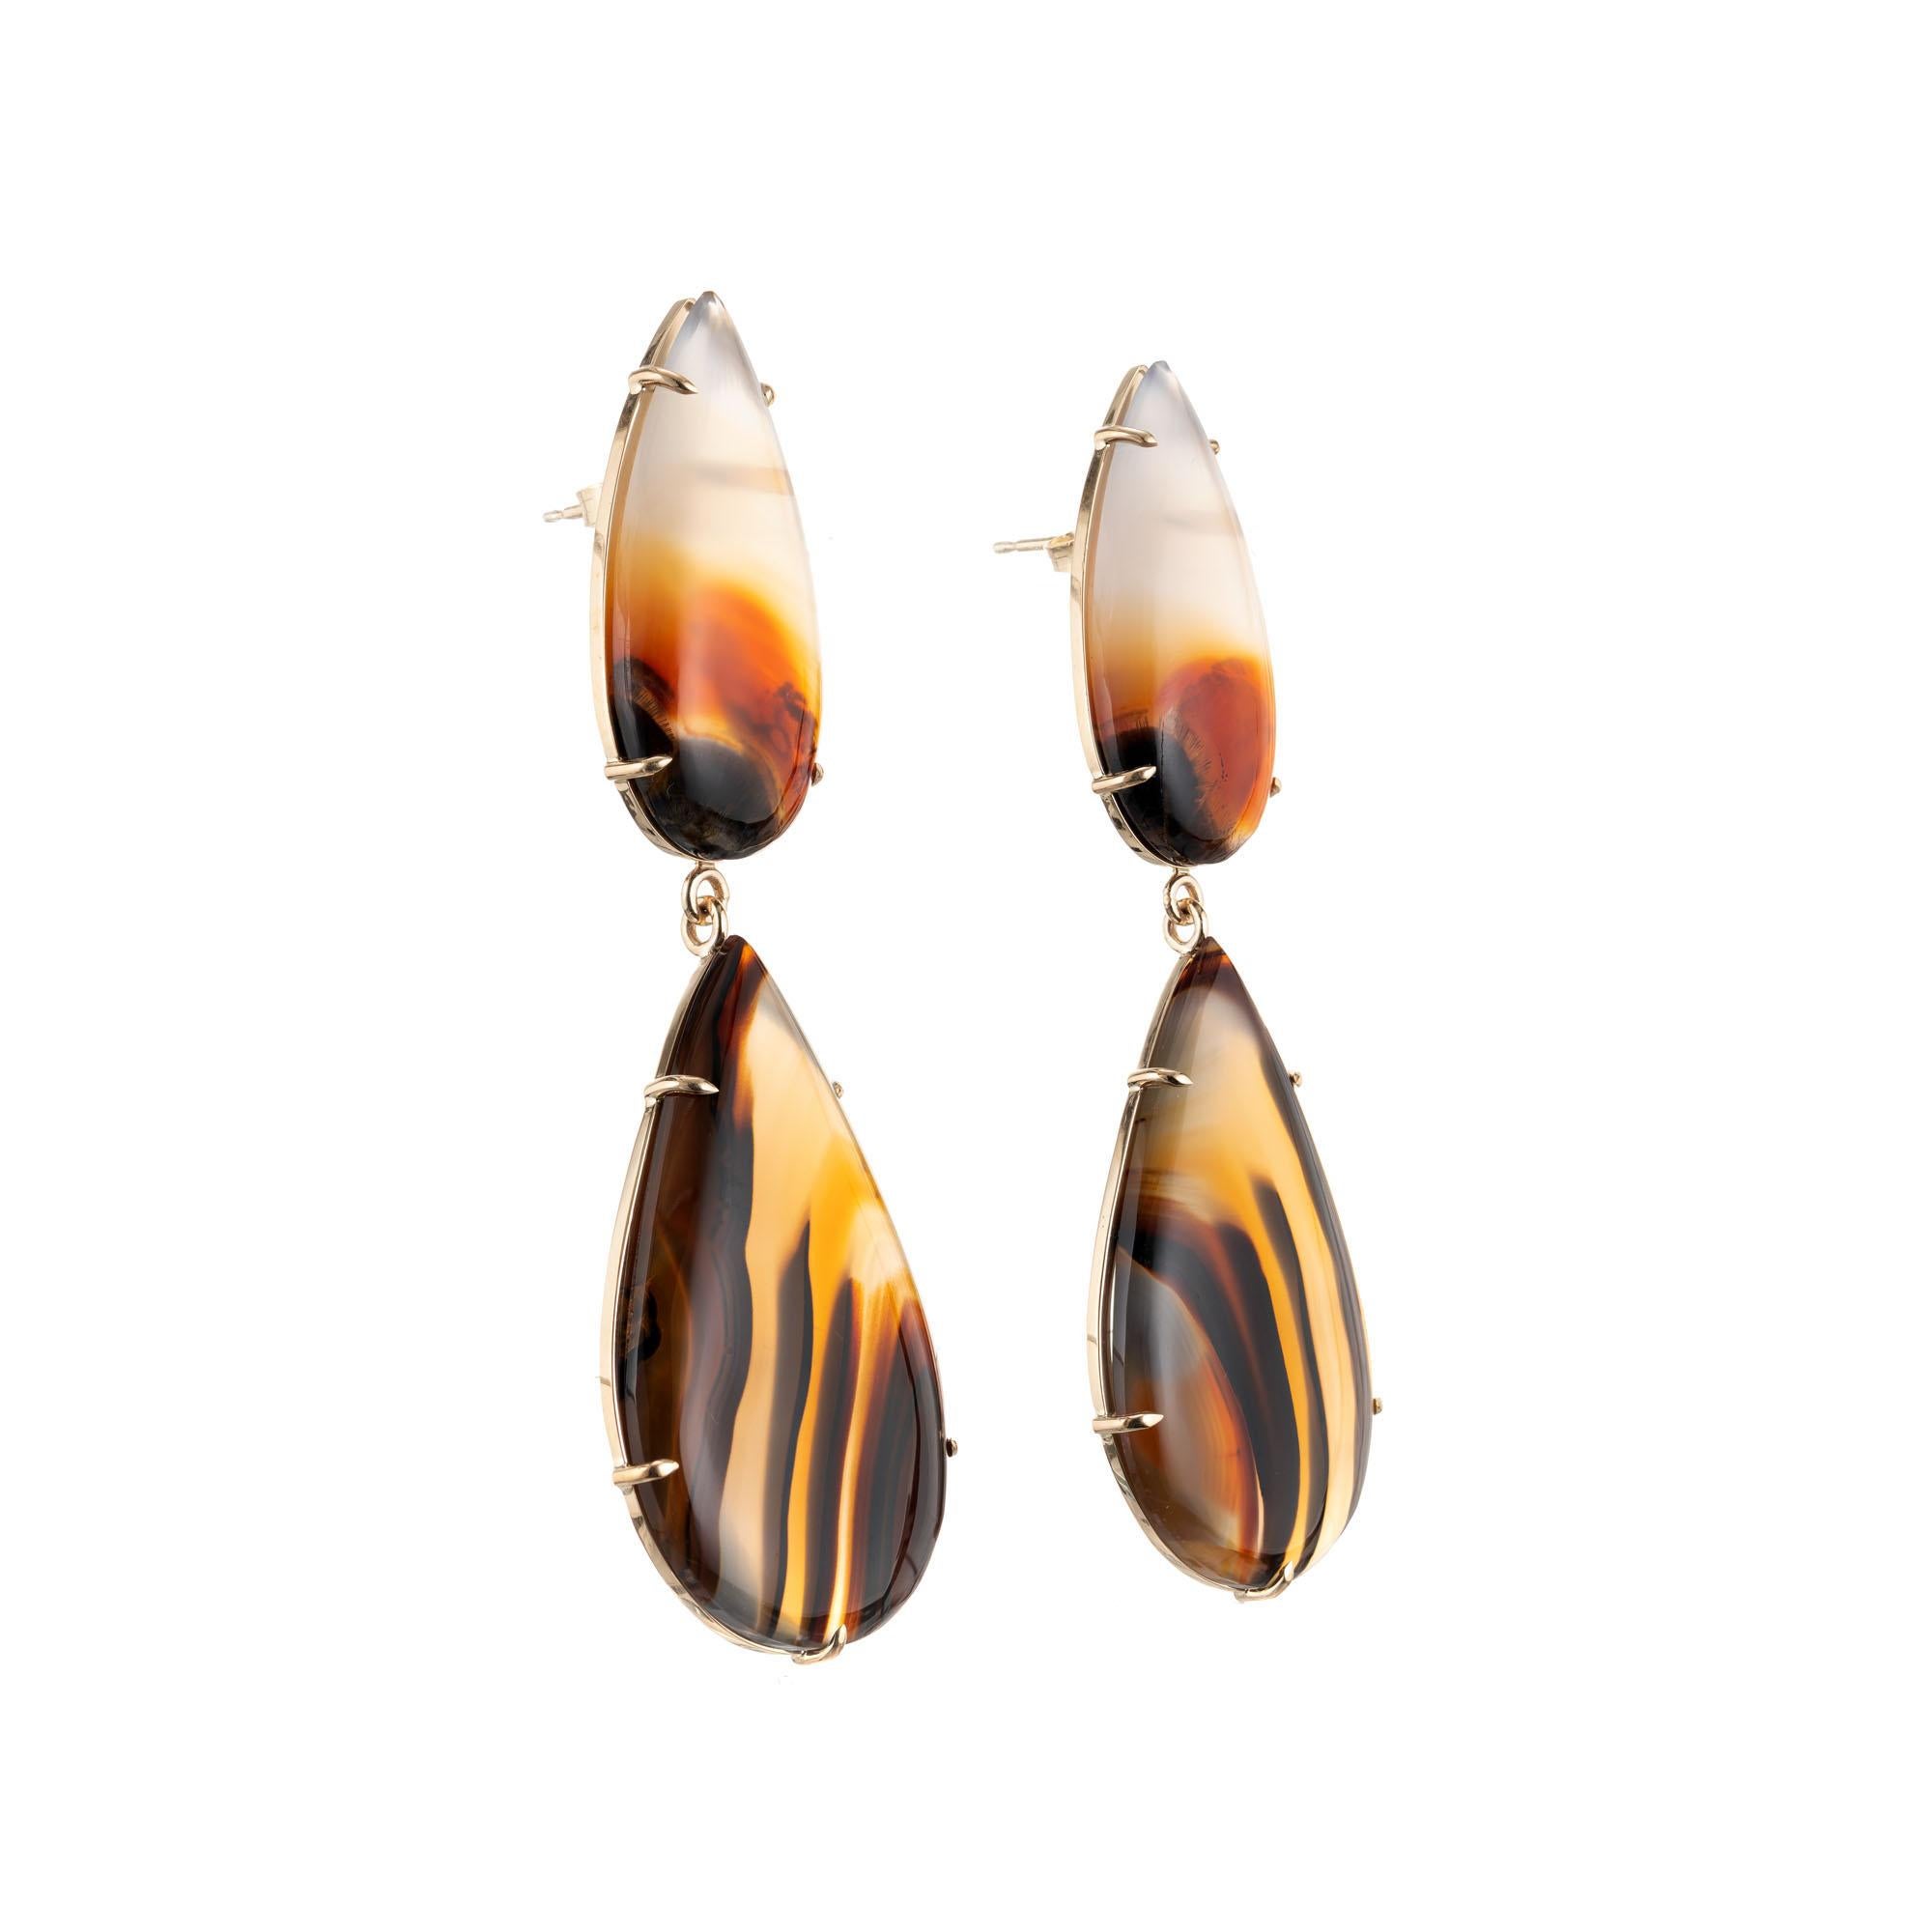 Peter Suchy banded Agate dangle earrings set in 14k yellow gold setting. Natural stones. Handmade in the Peter Suchy Workshop.

2 pear shape cabochon Agate, approx. total weight 43.26cts 
2 pear shape cabochon Agate, approx. total weight 22.46cts